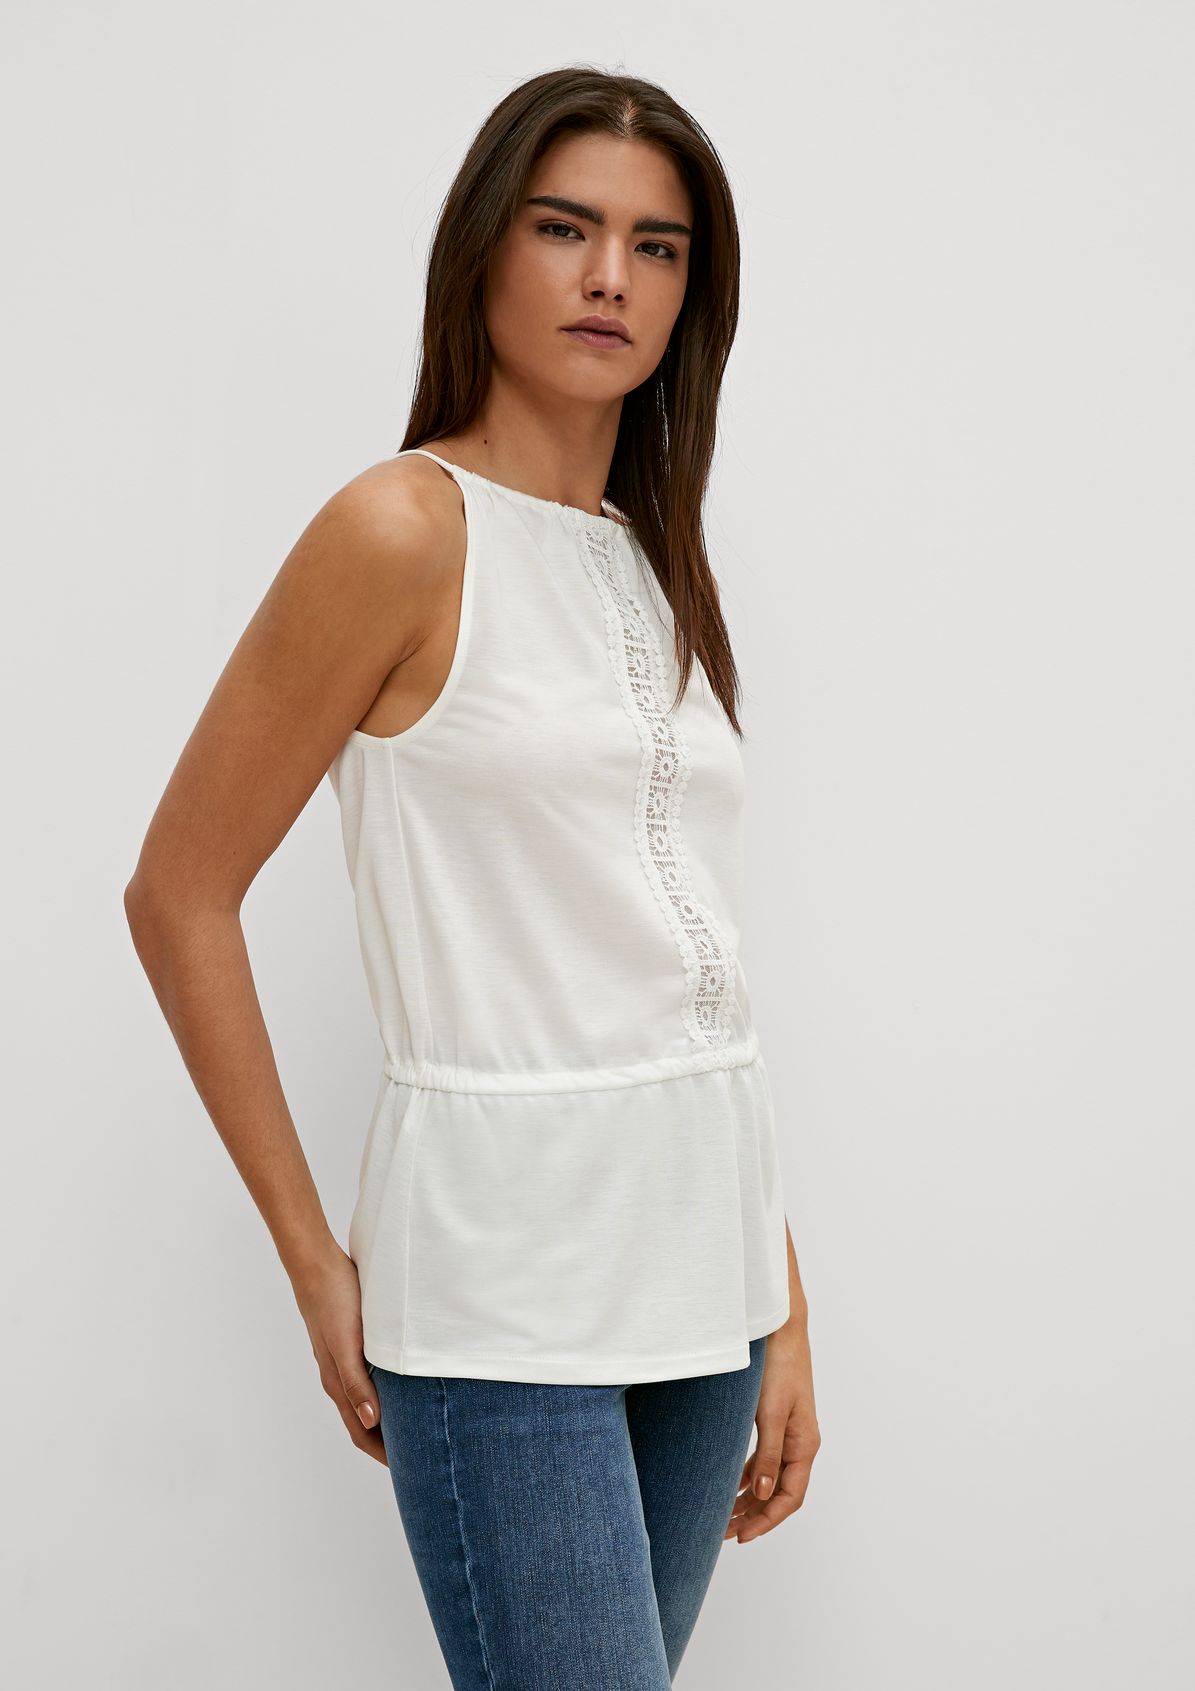 Top with lace details from comma